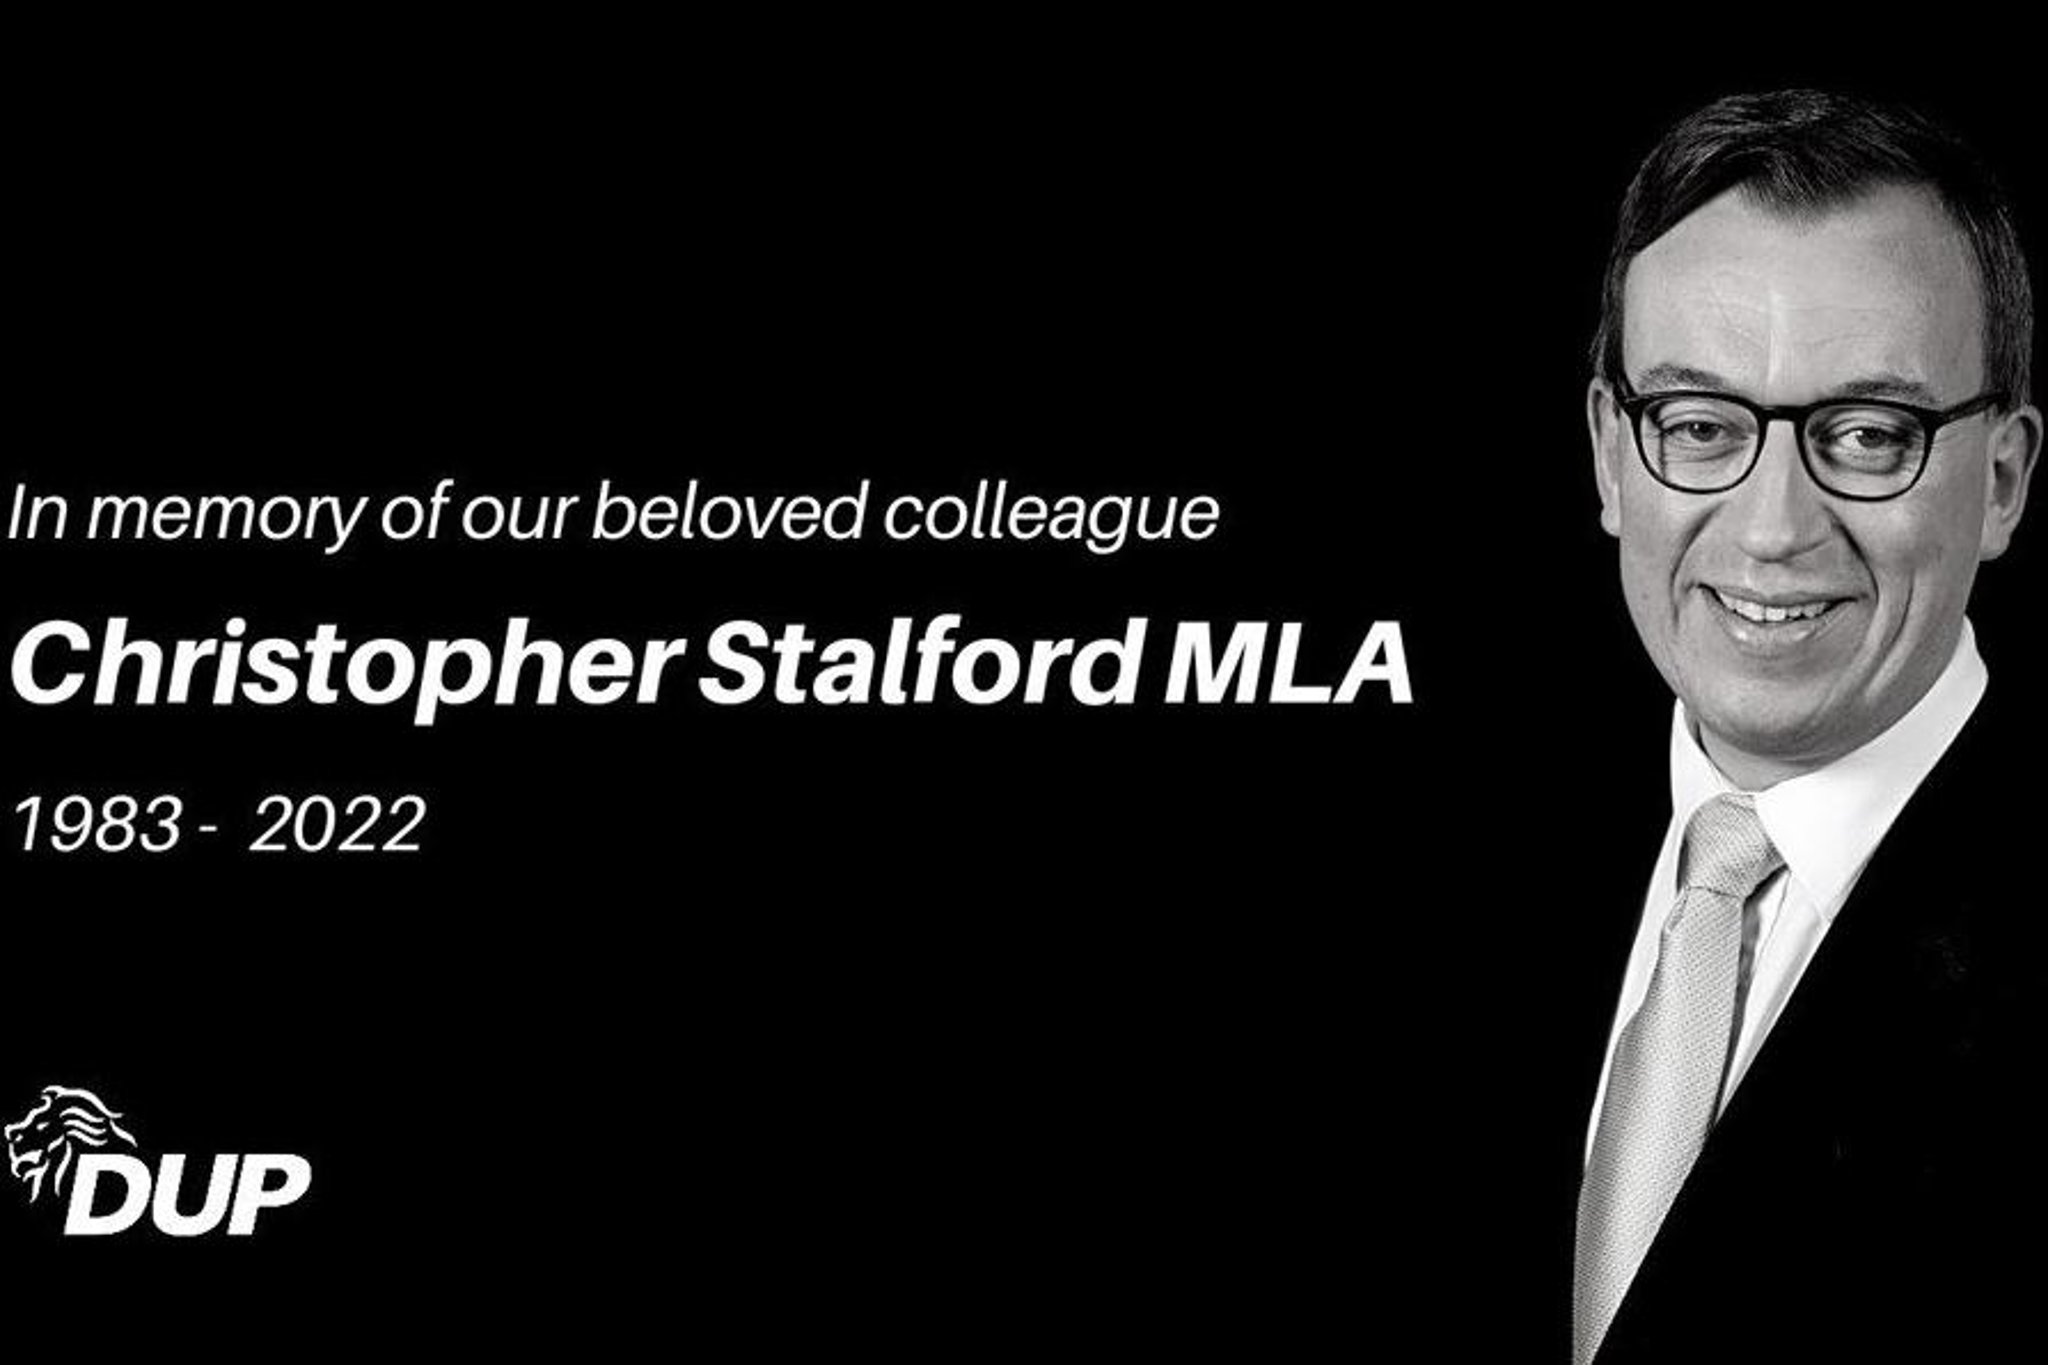 Christopher Stalford: The MLA who advocated unionism from young age